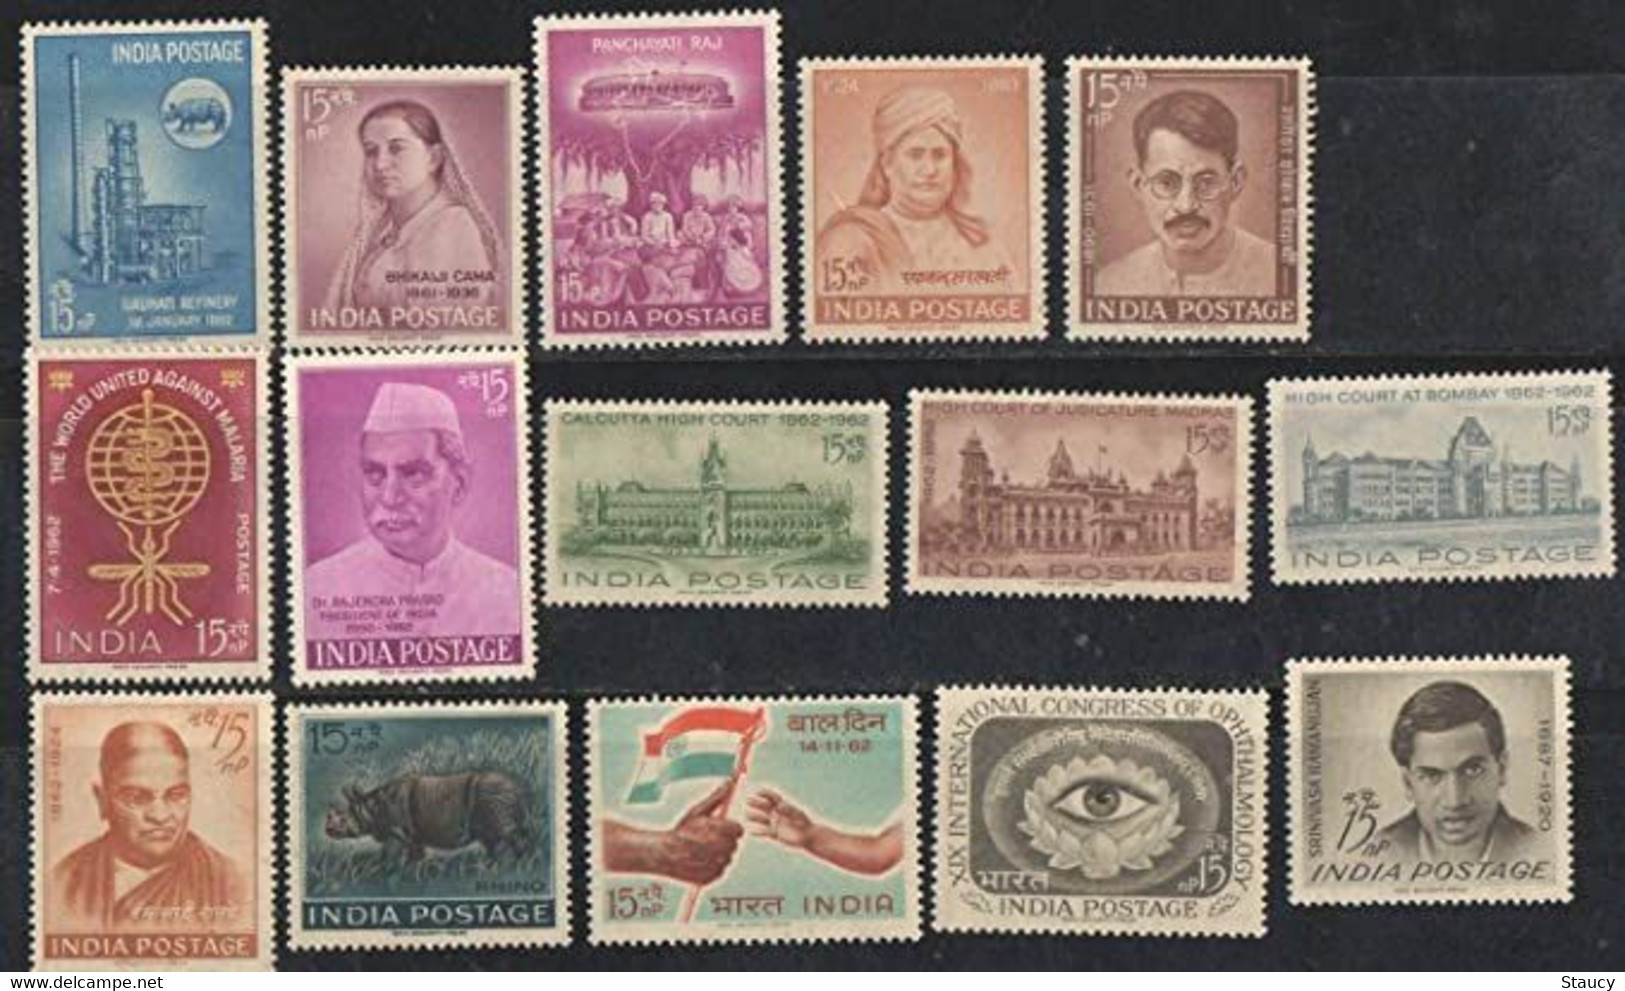 India 1962 Complete Year Pack / Set / Collection Total 15 Stamps (No Missing) MNH As Per Scan - Annate Complete